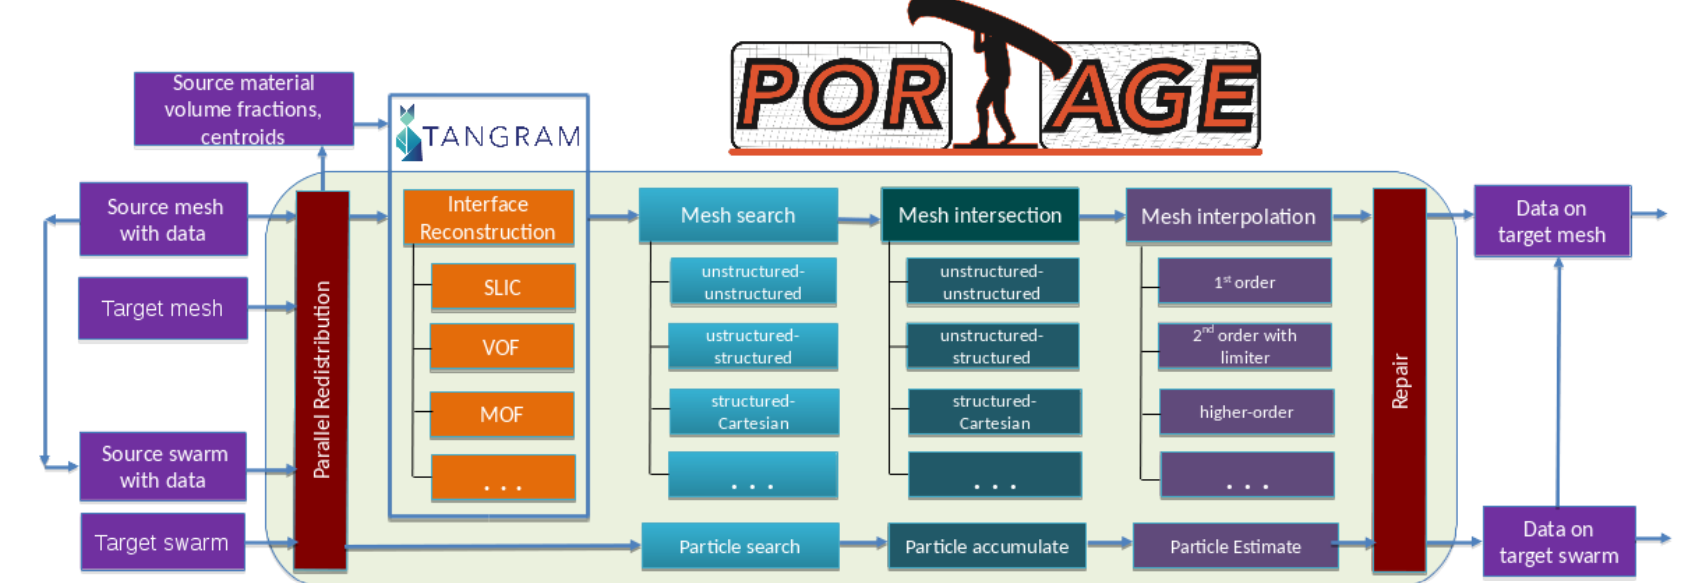 An overview of how Portage works as a framework for the transfer of data between meshes and particle swarms in computational physics applications.